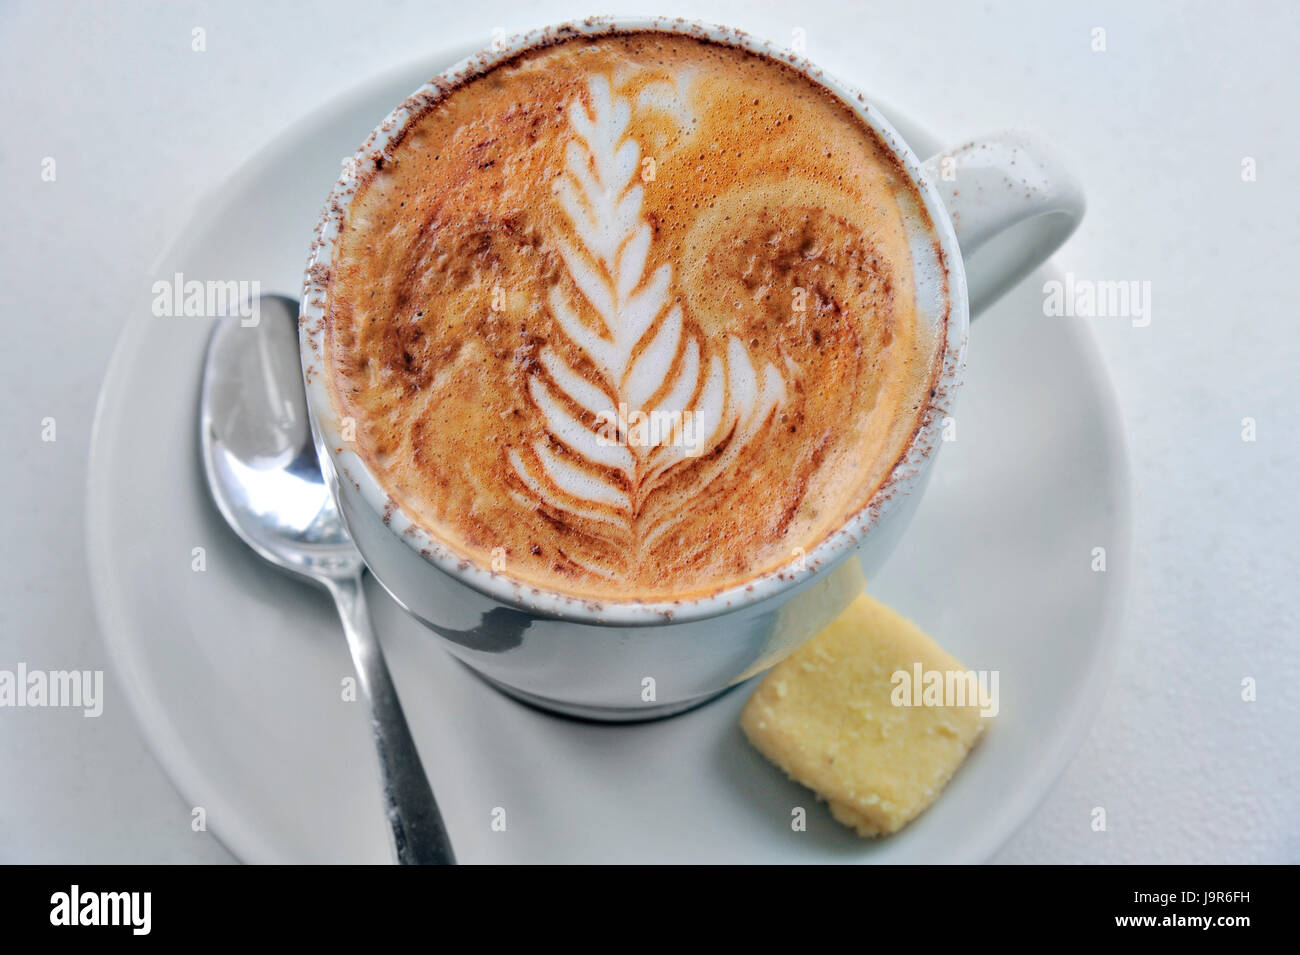 Typical Australian style coffee with illustrative cream topping. Stock Photo